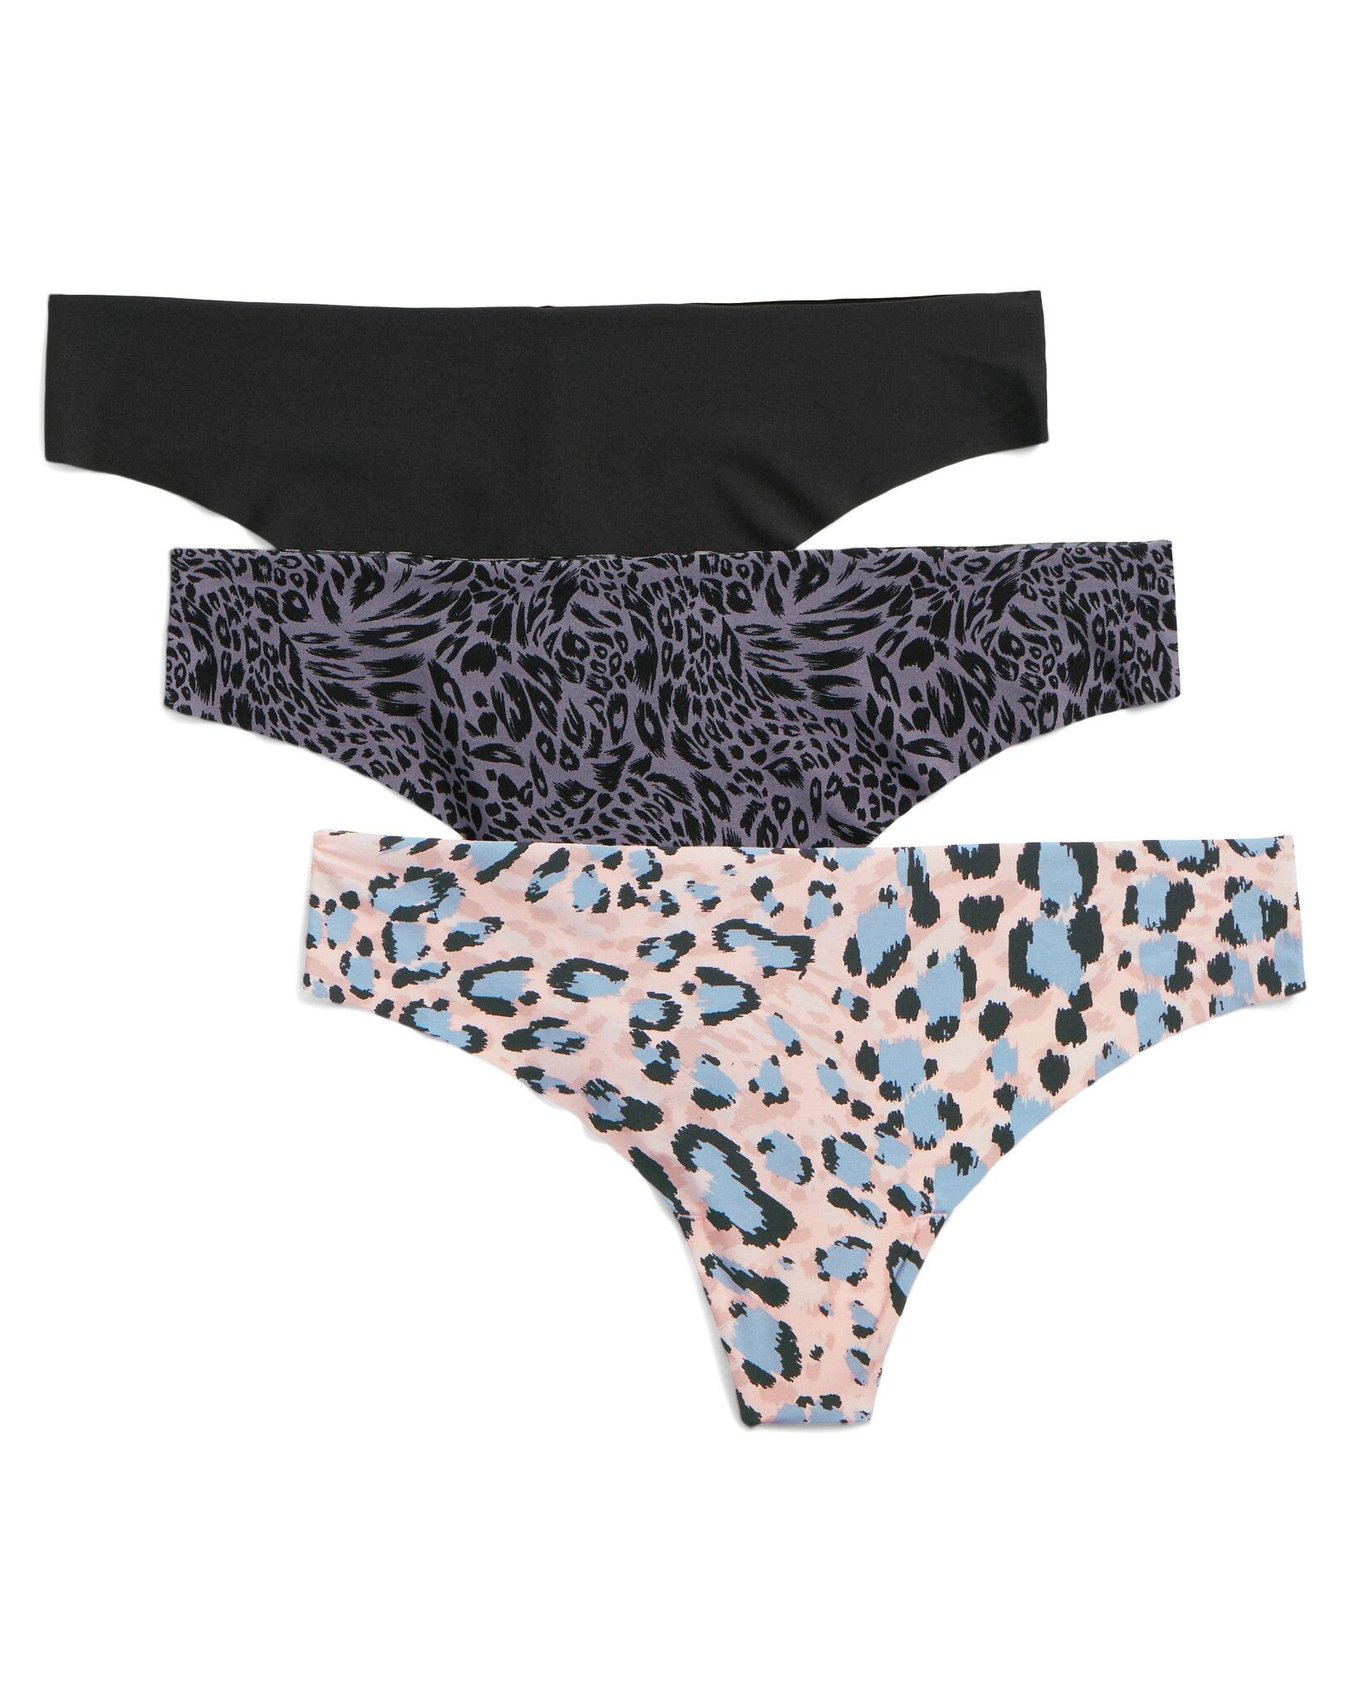 Victoria's Secret Very Sexy Lace Up Thong Panty High Rise Leopard